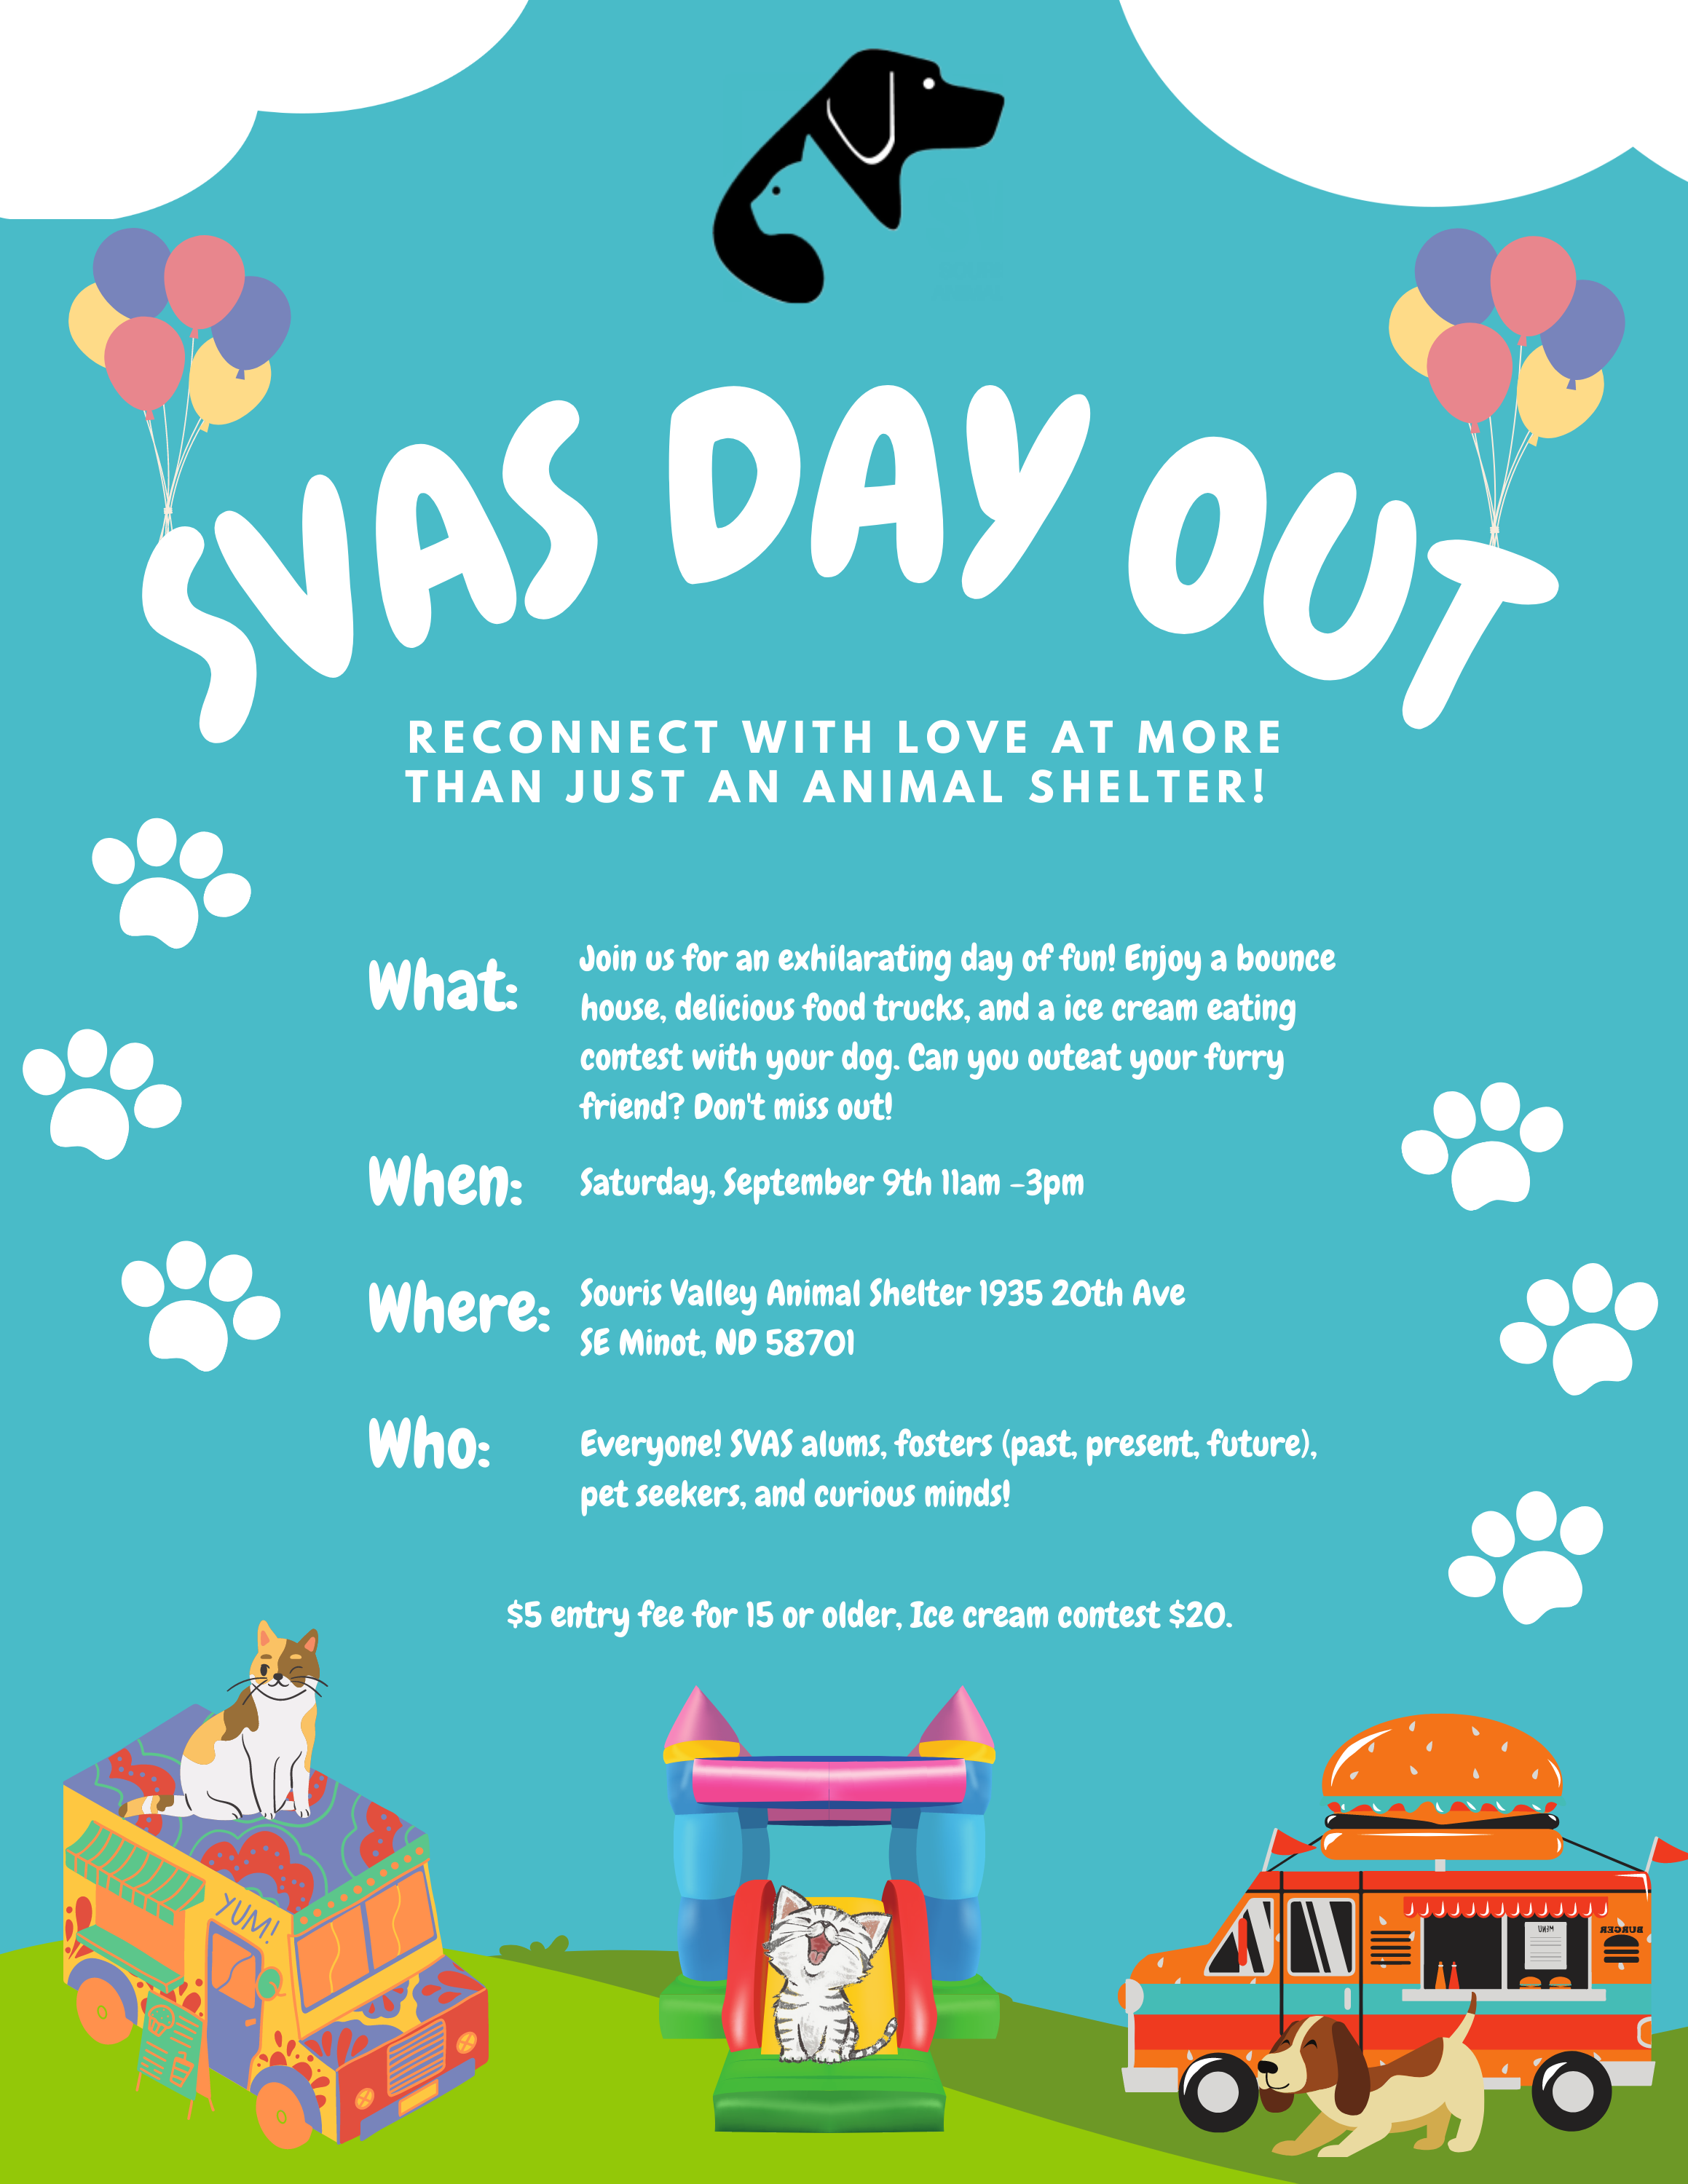 SVAS Day Out Flyer